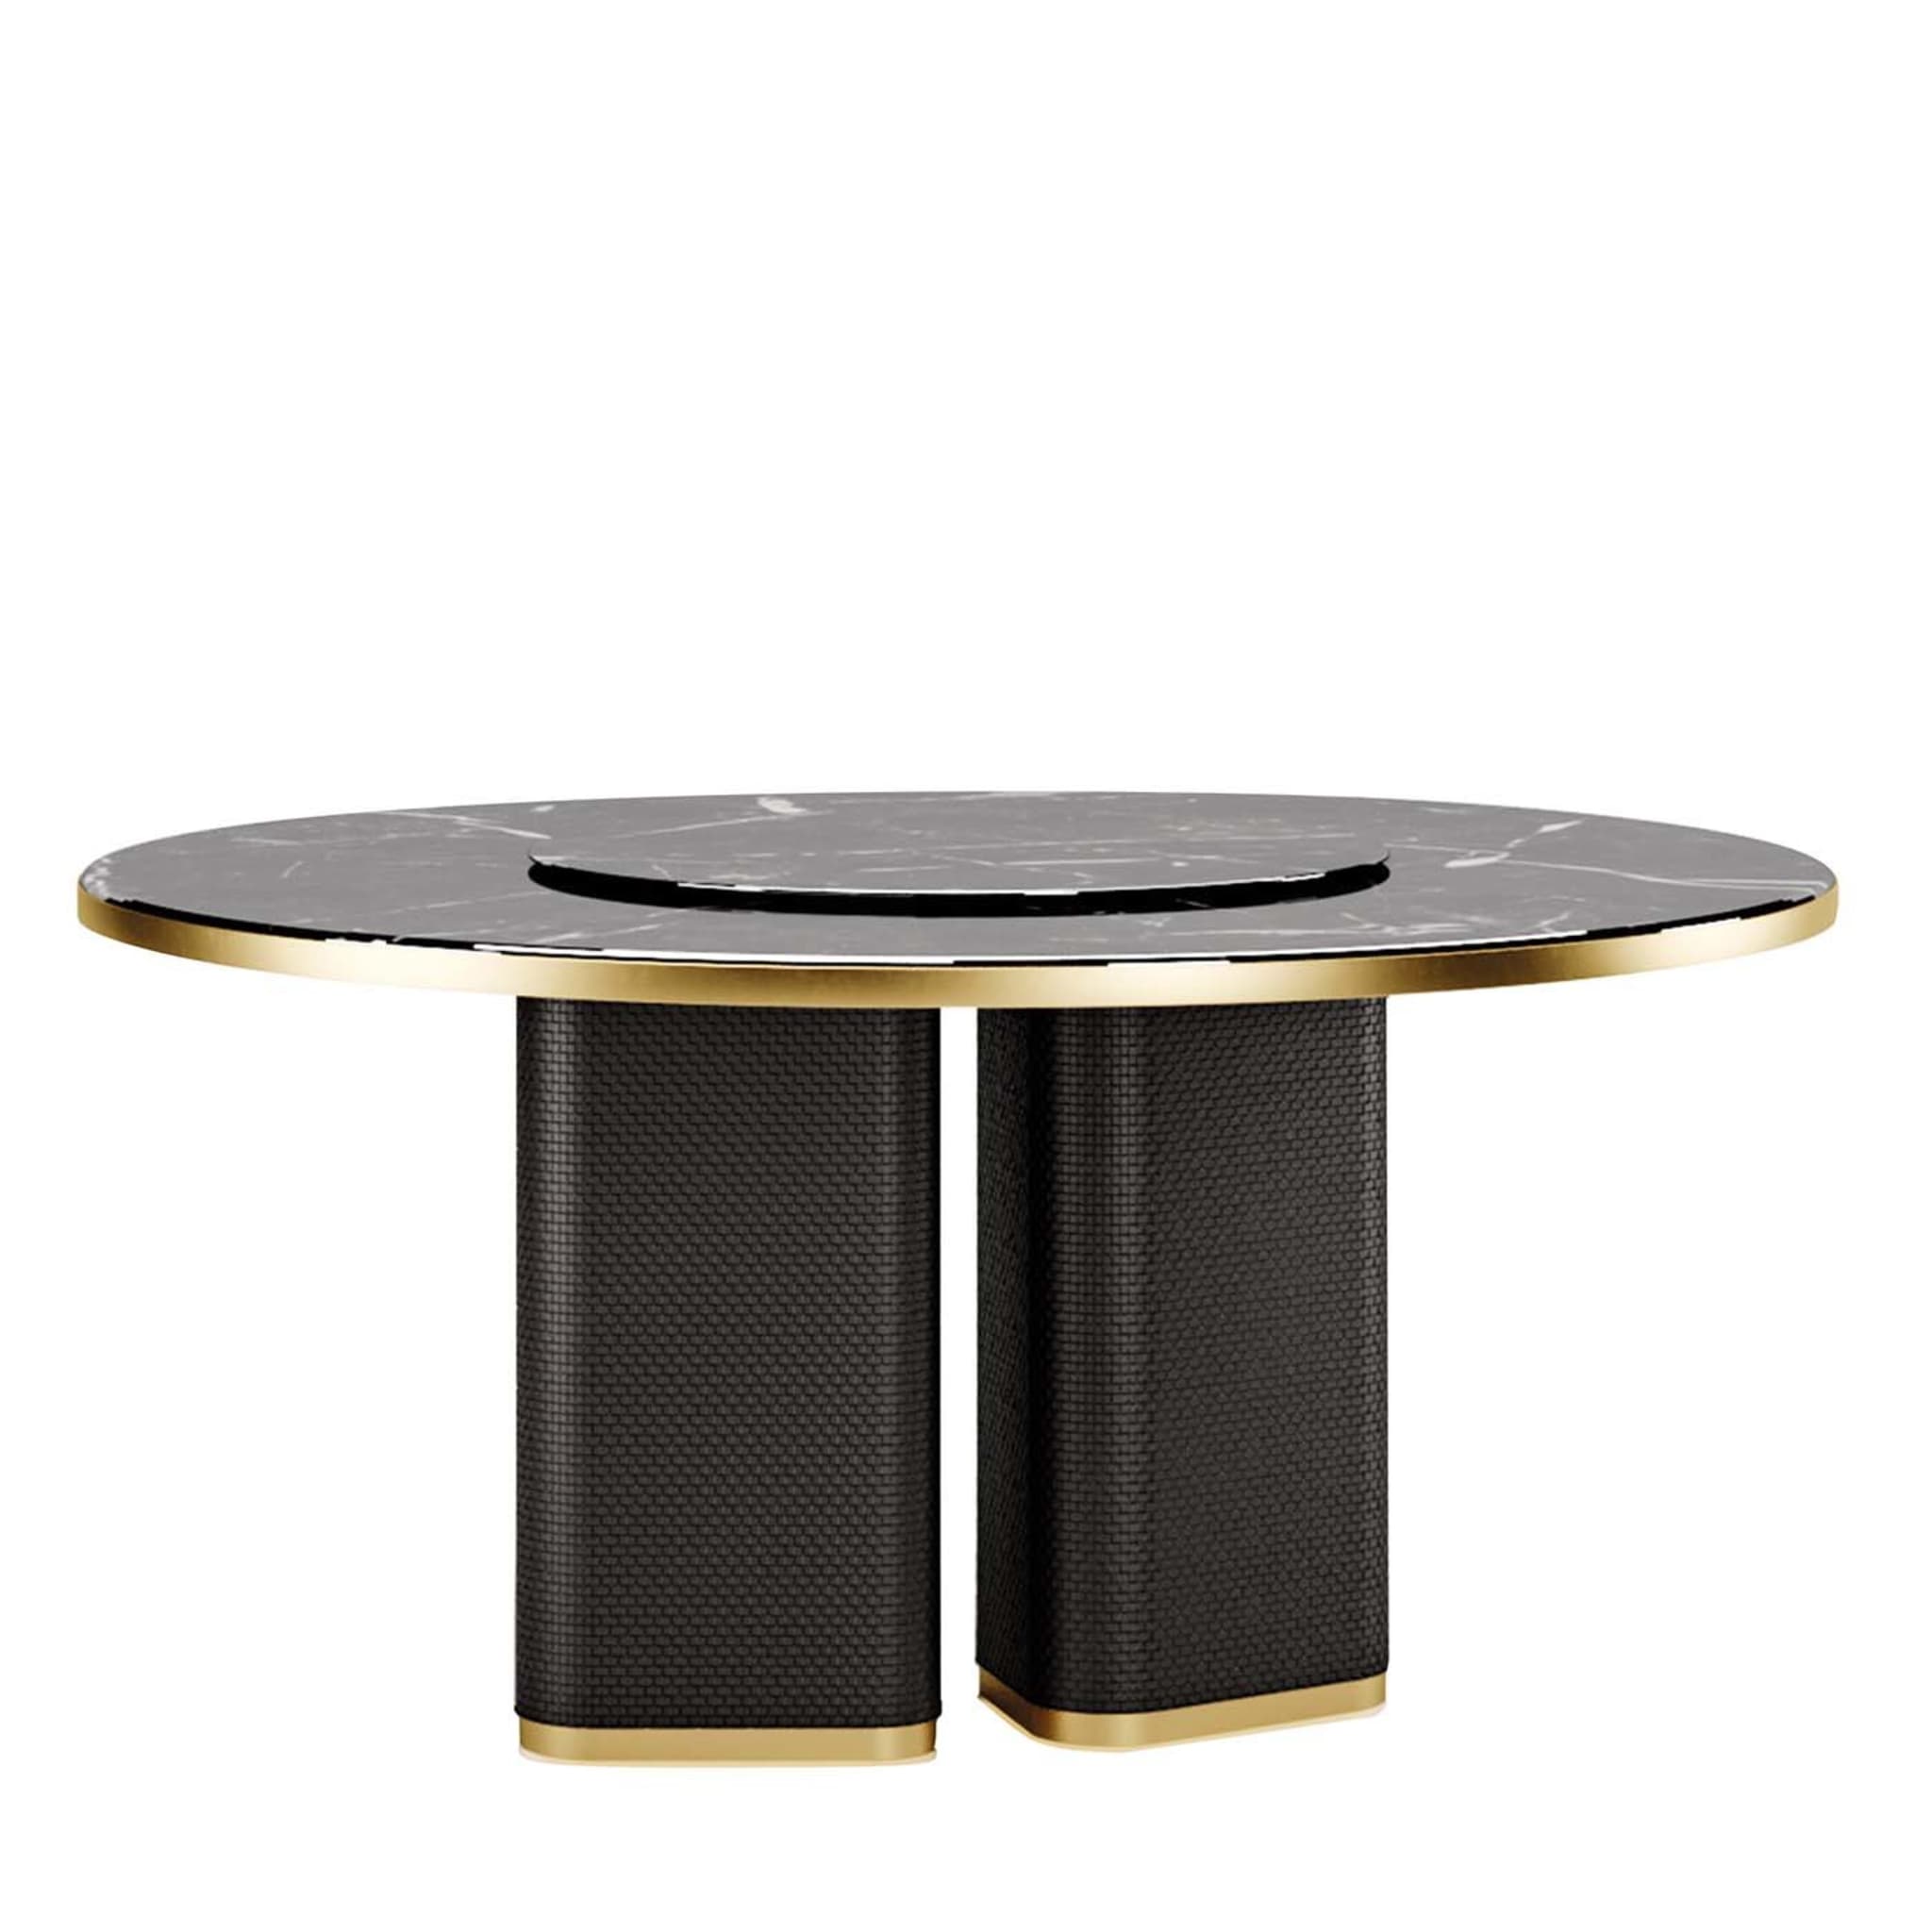 Fabian Table with Lazy Susan  - Main view